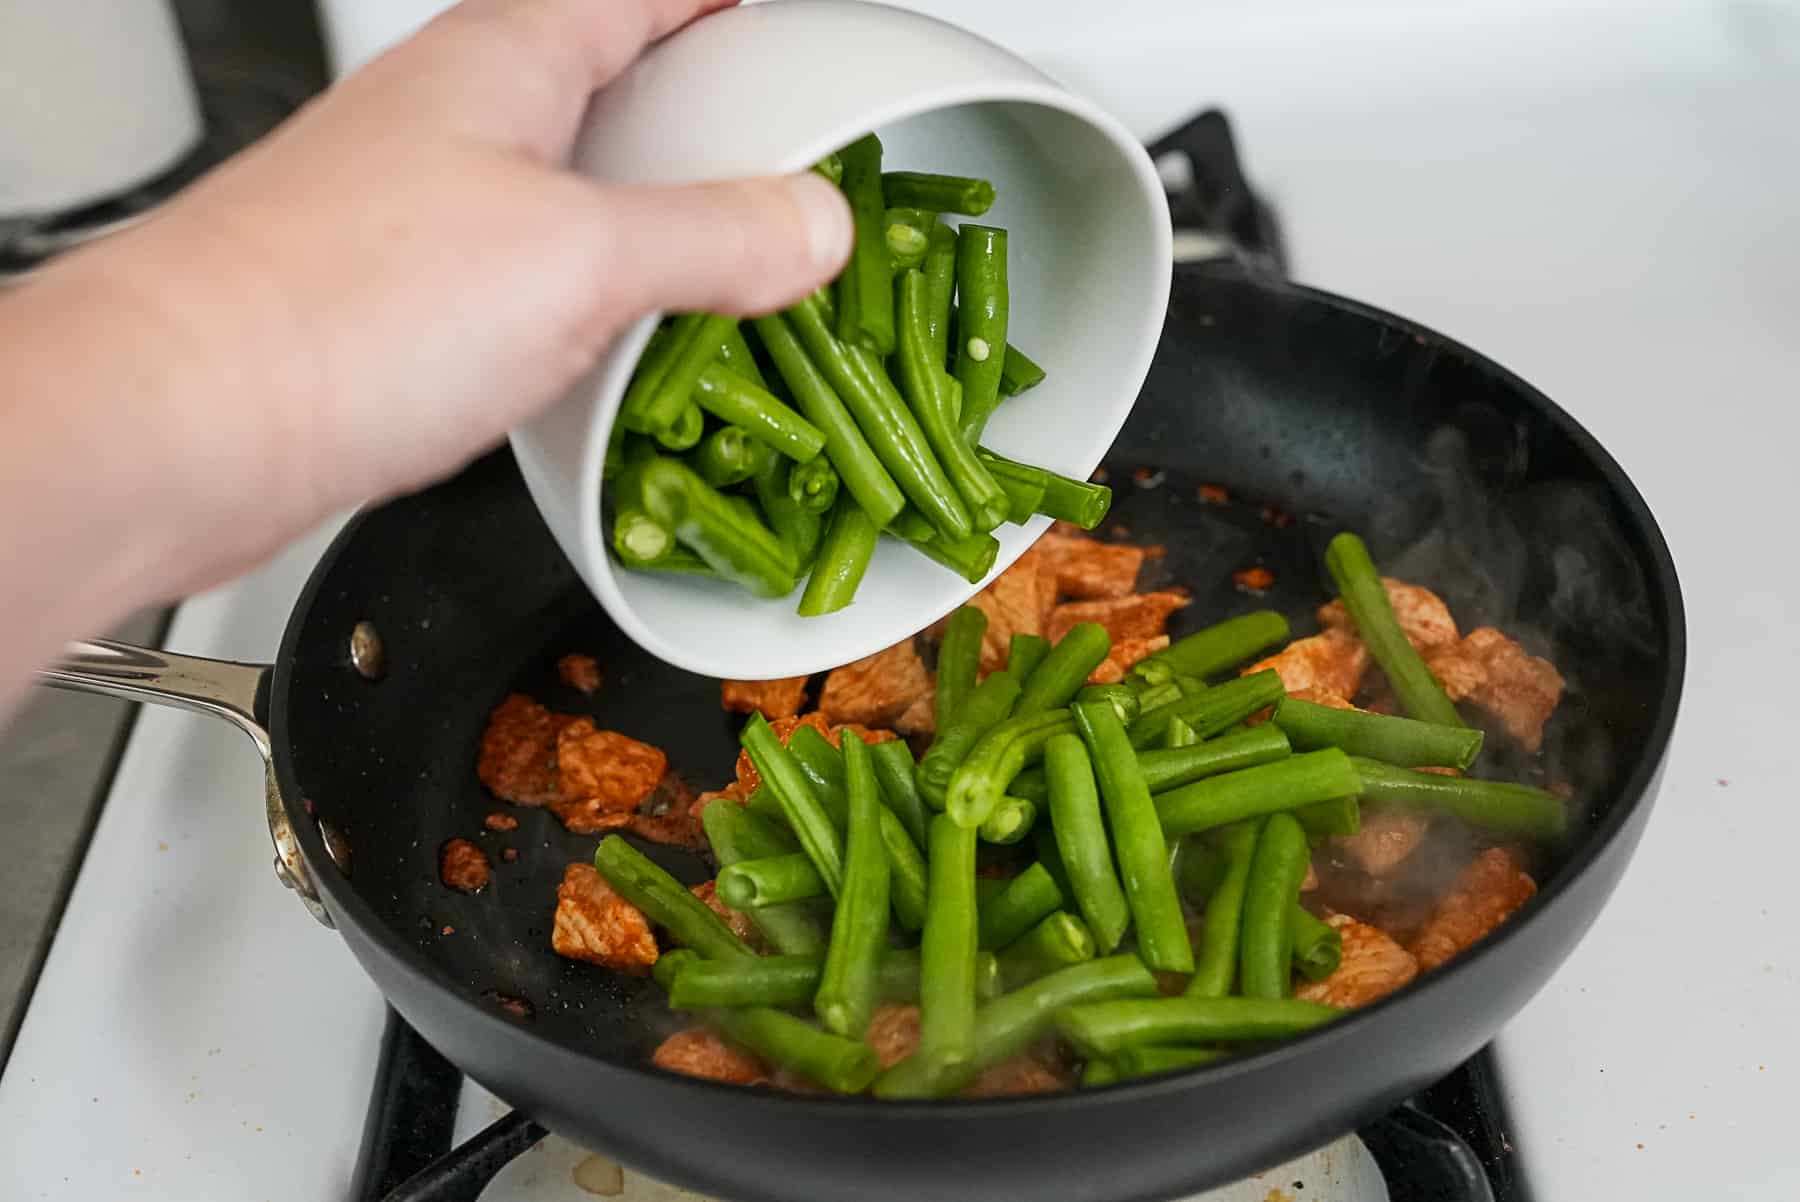 Add the Green Beans